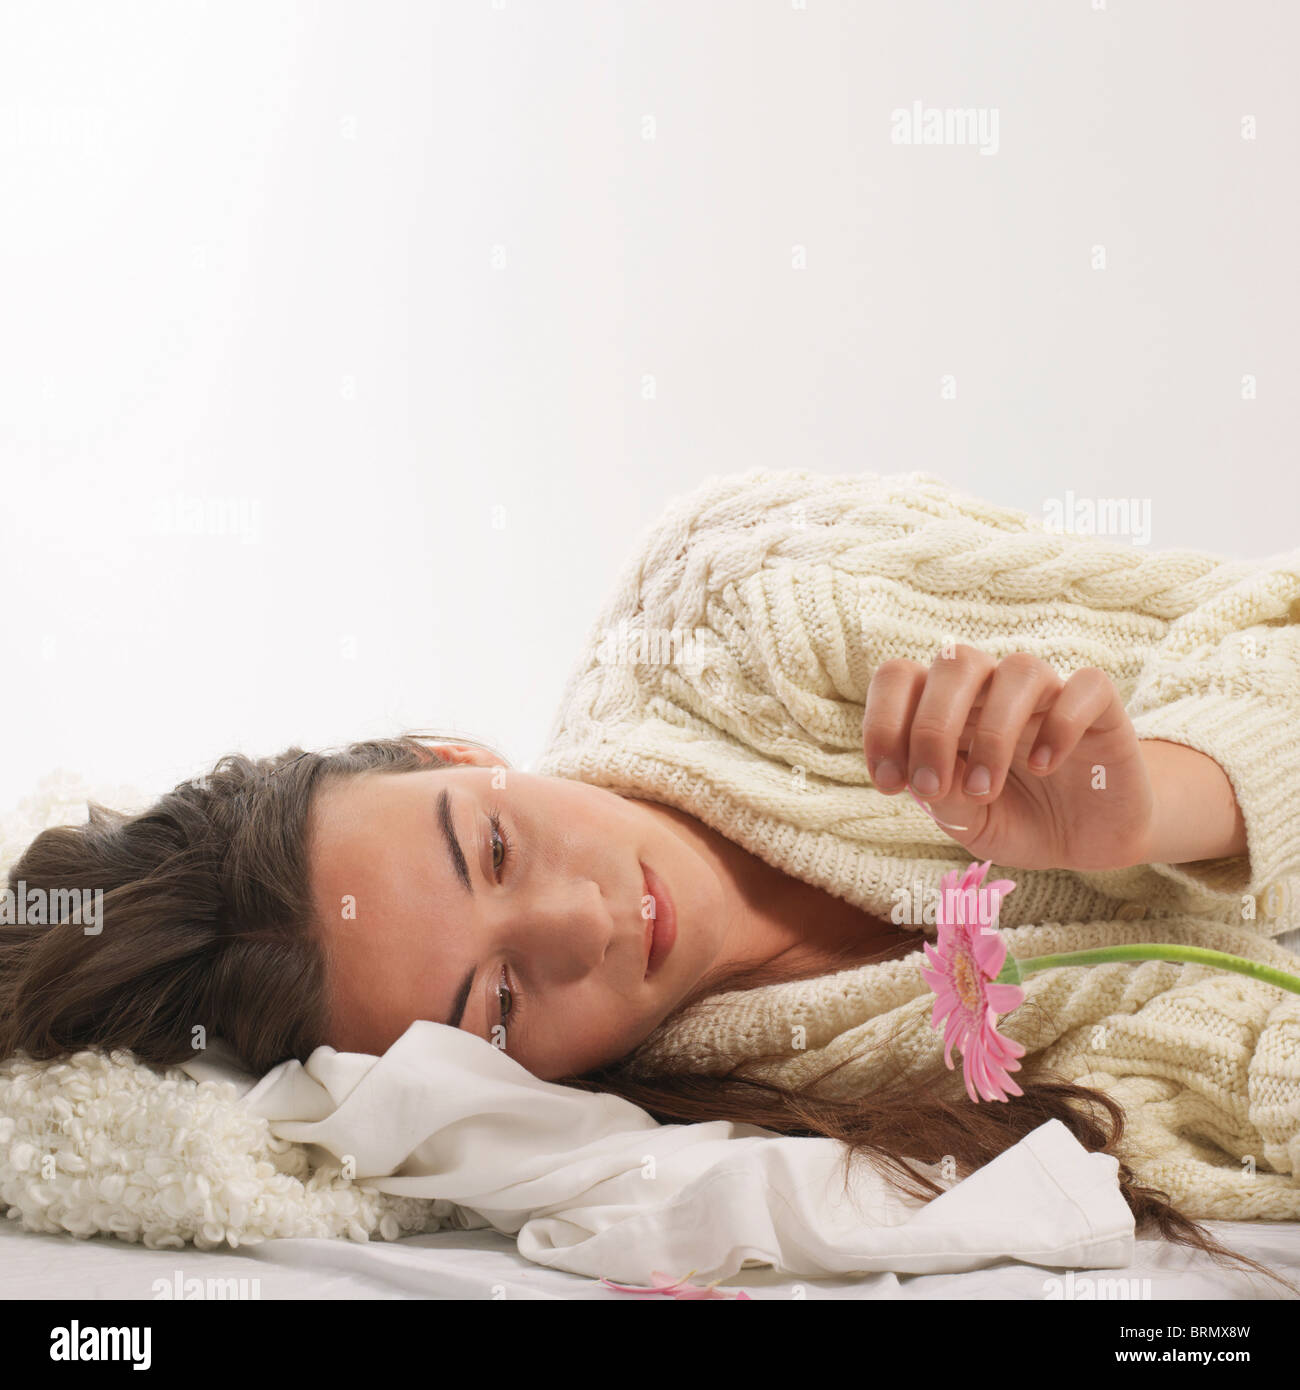 Woman reclined with pink flower Stock Photo